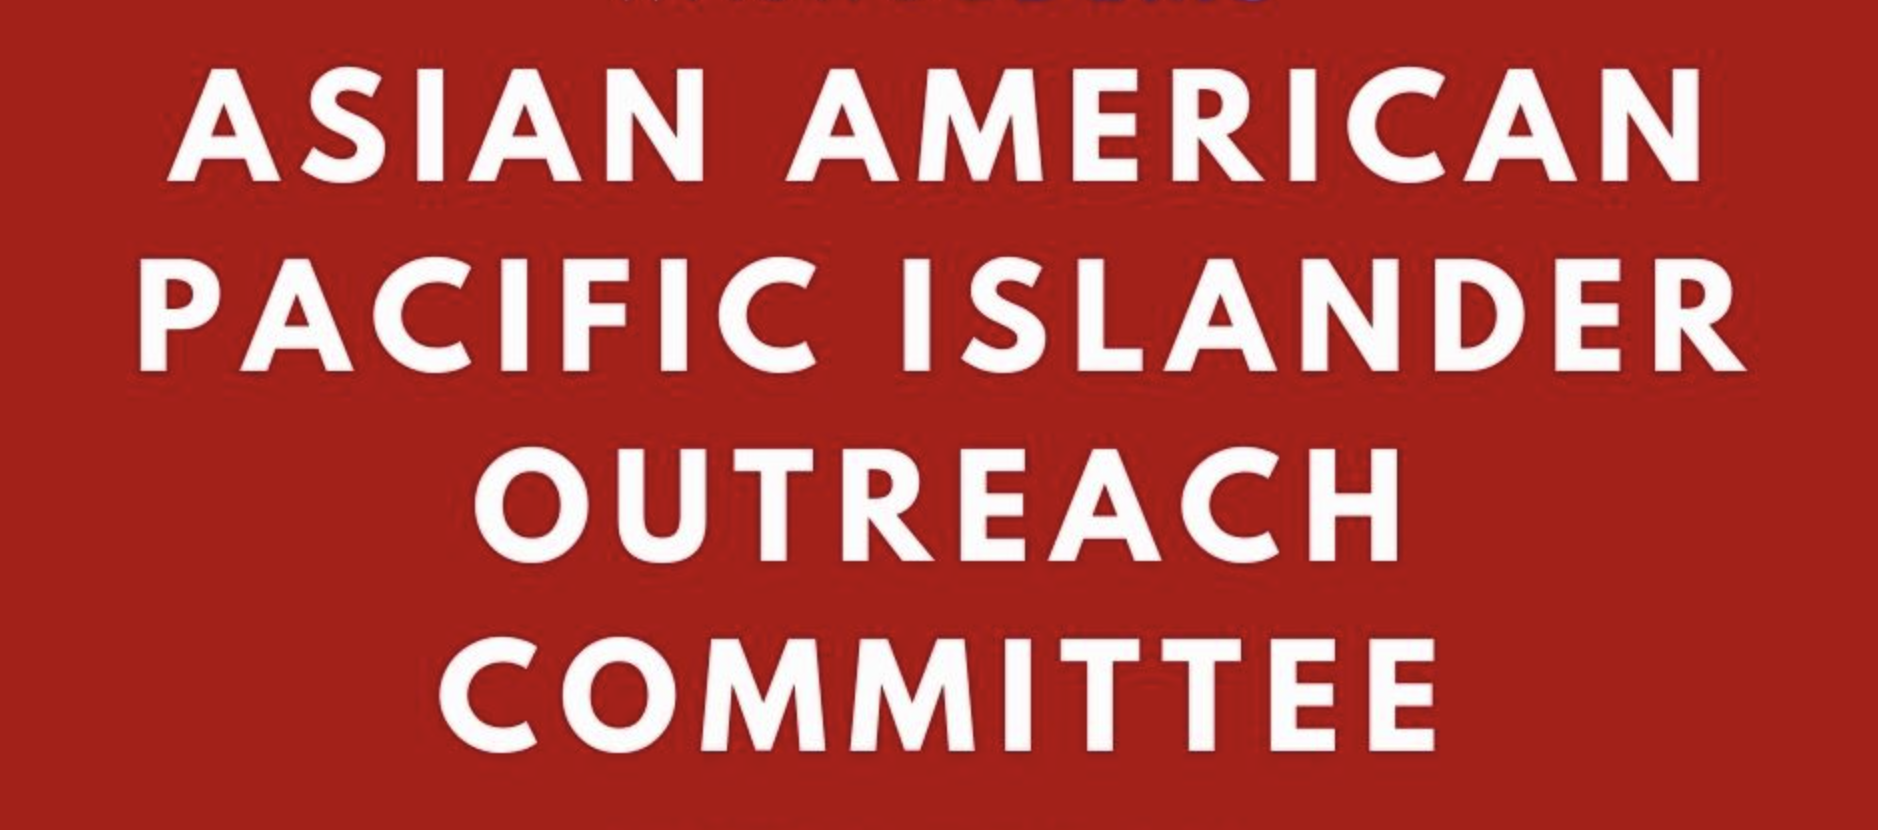 Asian American Pacific Islander Outreach Committee